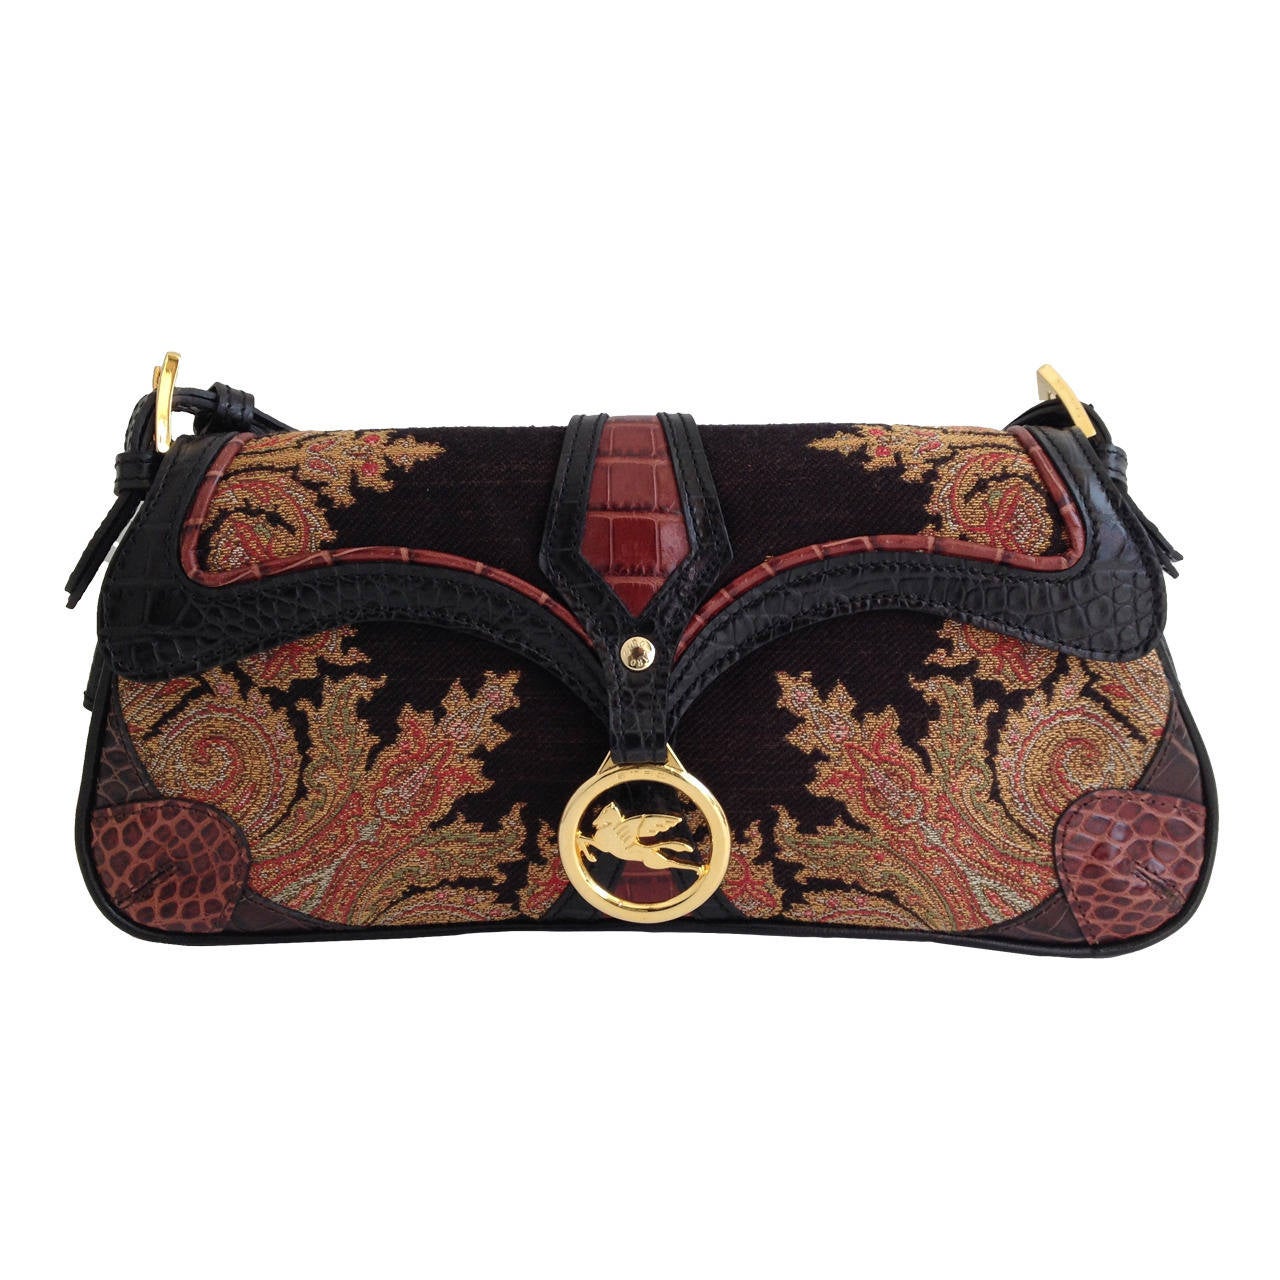 Etro Red and Black Paisley Bag